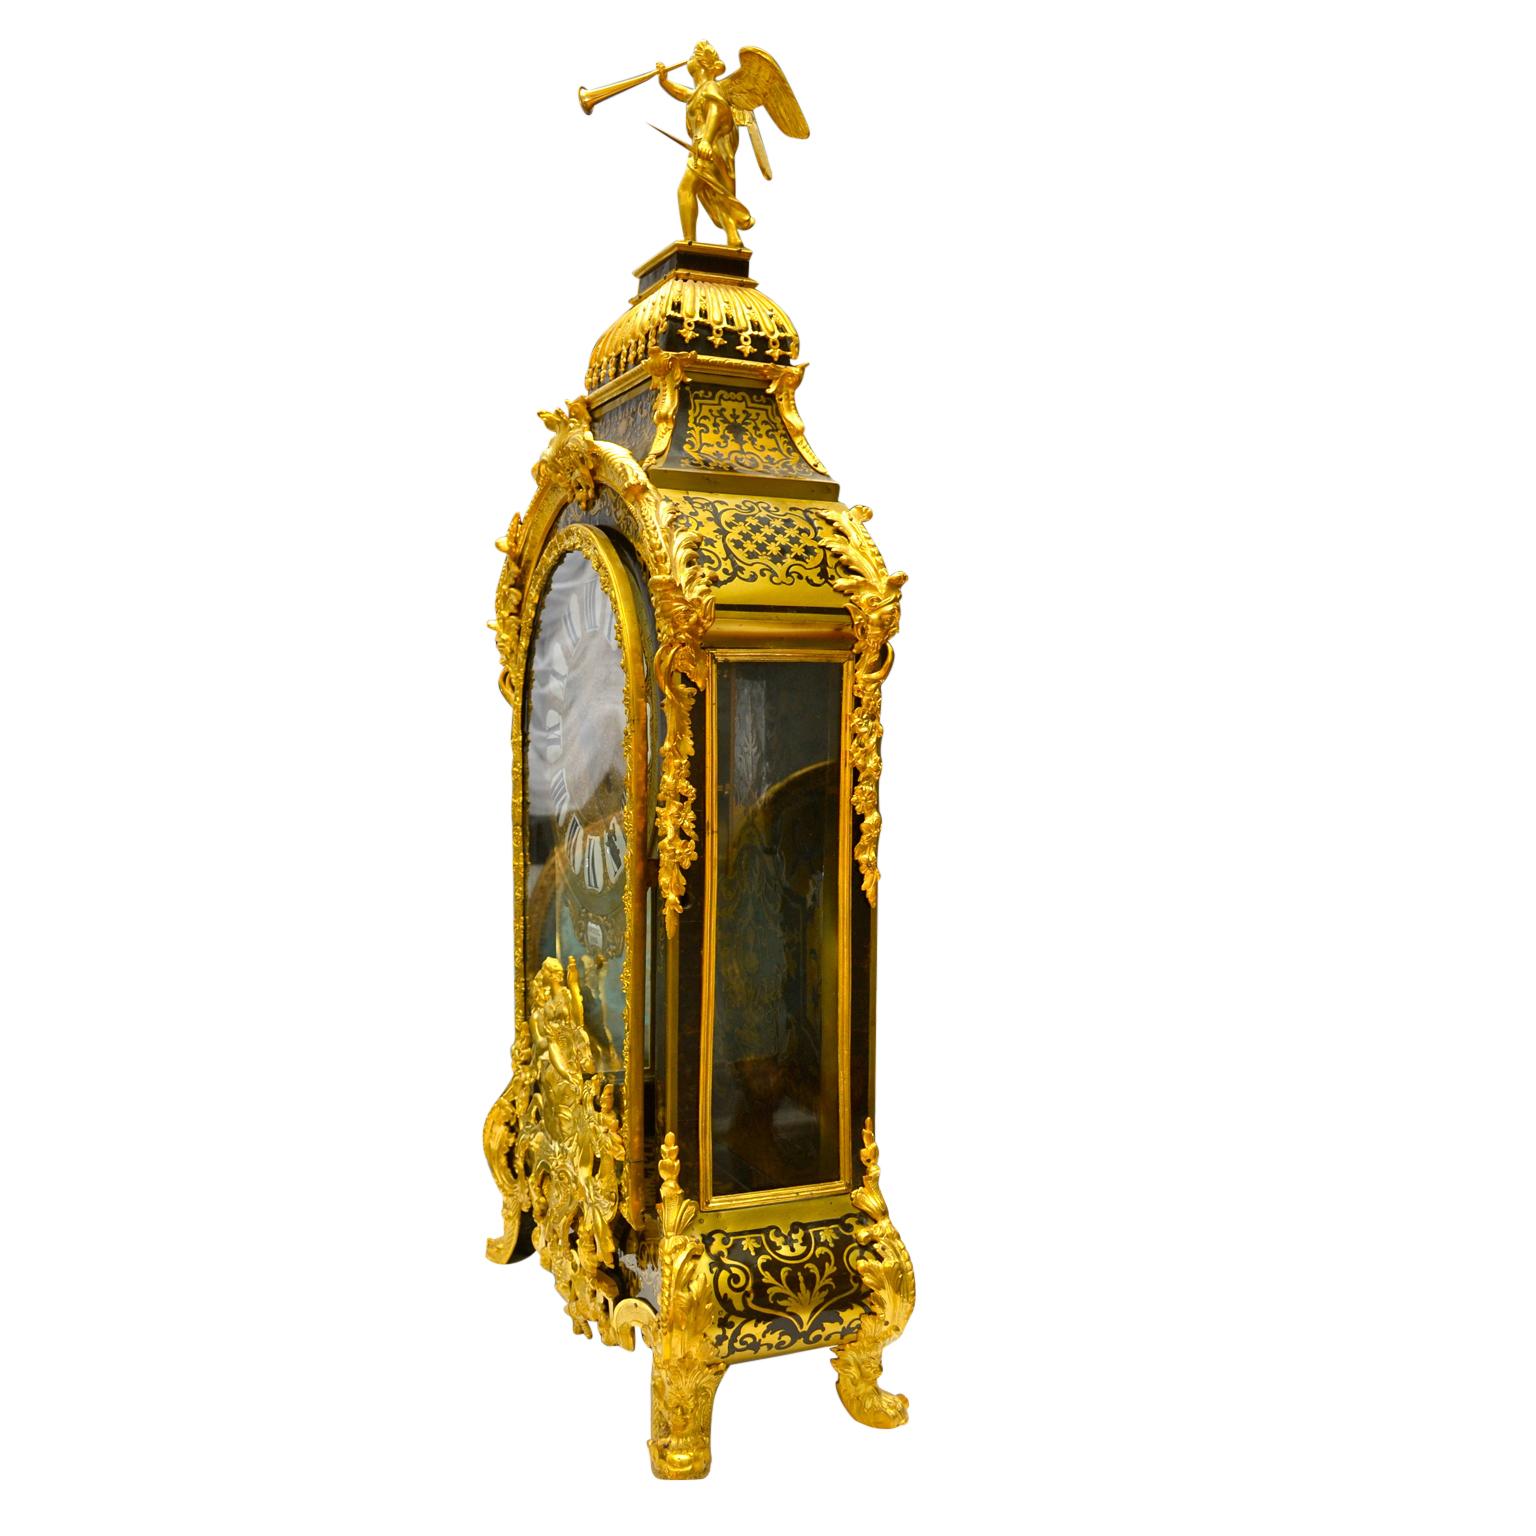 Grand scale boulle Cartel clock and matching plinth, the ebonized wood case is embellished all-over with gilded bronze mounts (re-gilt). The medallion below the clock dial shows a centaur (half man, half horse) carrying off a young maiden. On top of